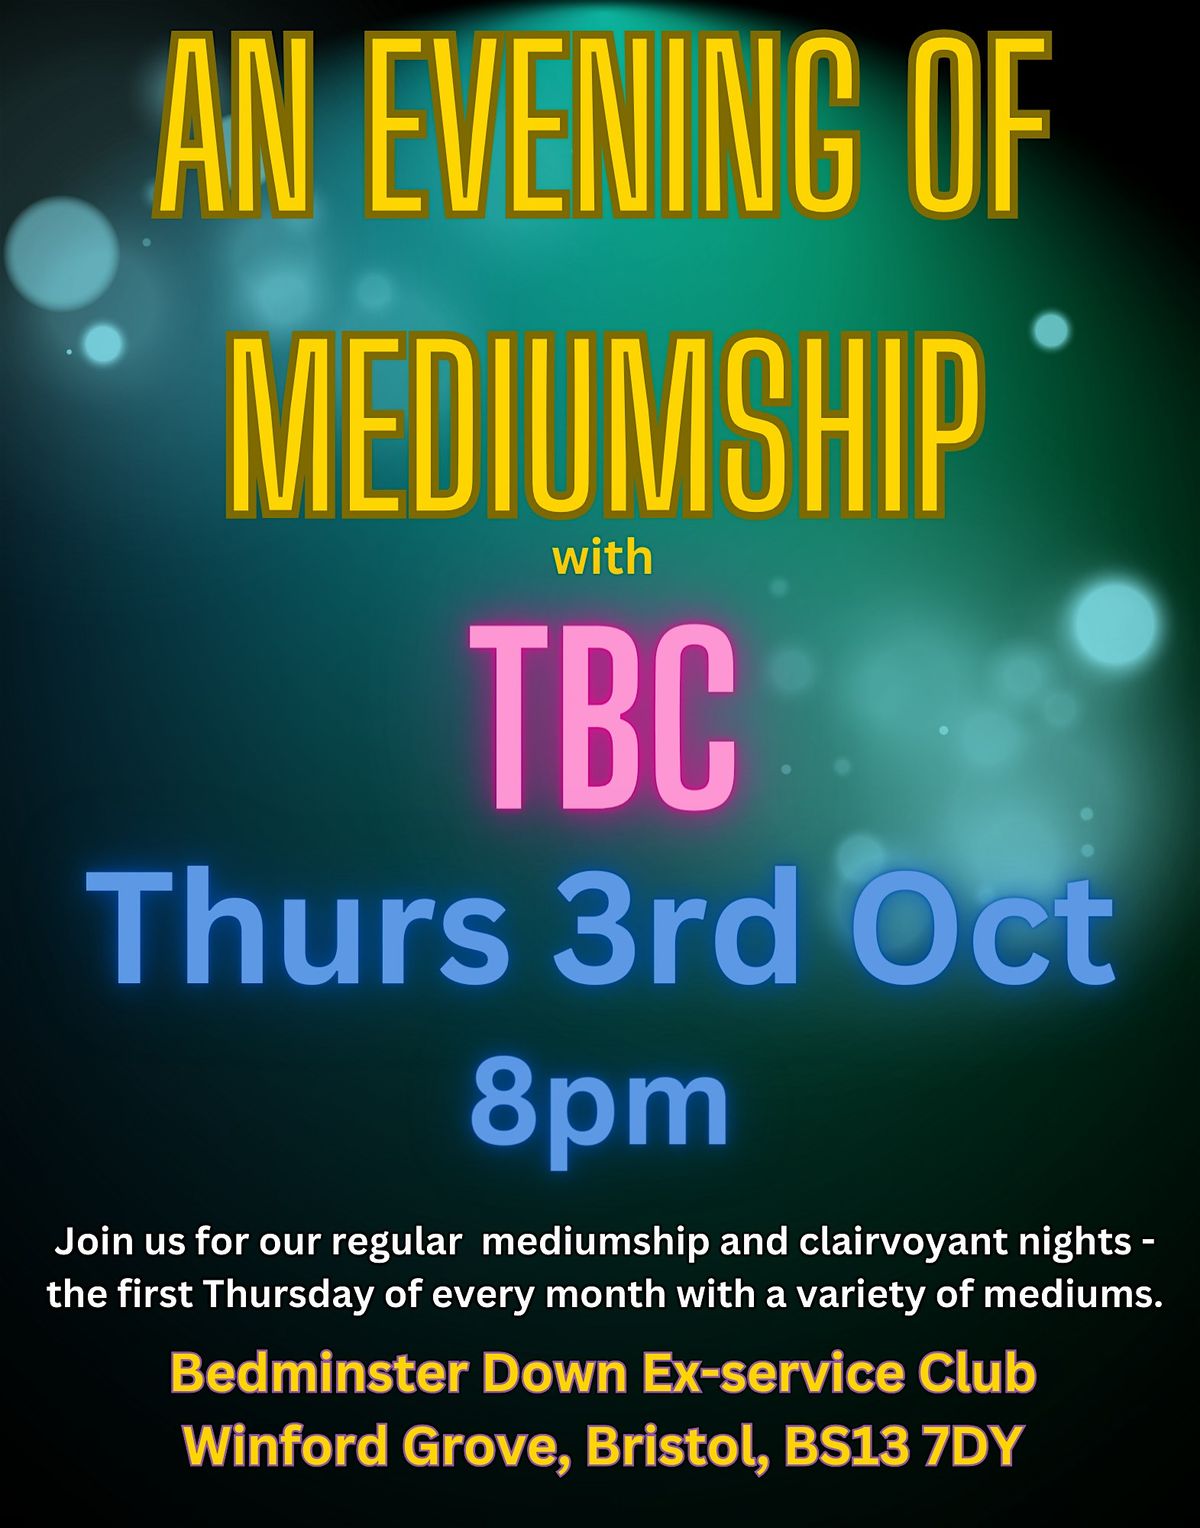 Evening of Clairvoyance & Mediumship - FIRST THURSDAY OF THE MONTH